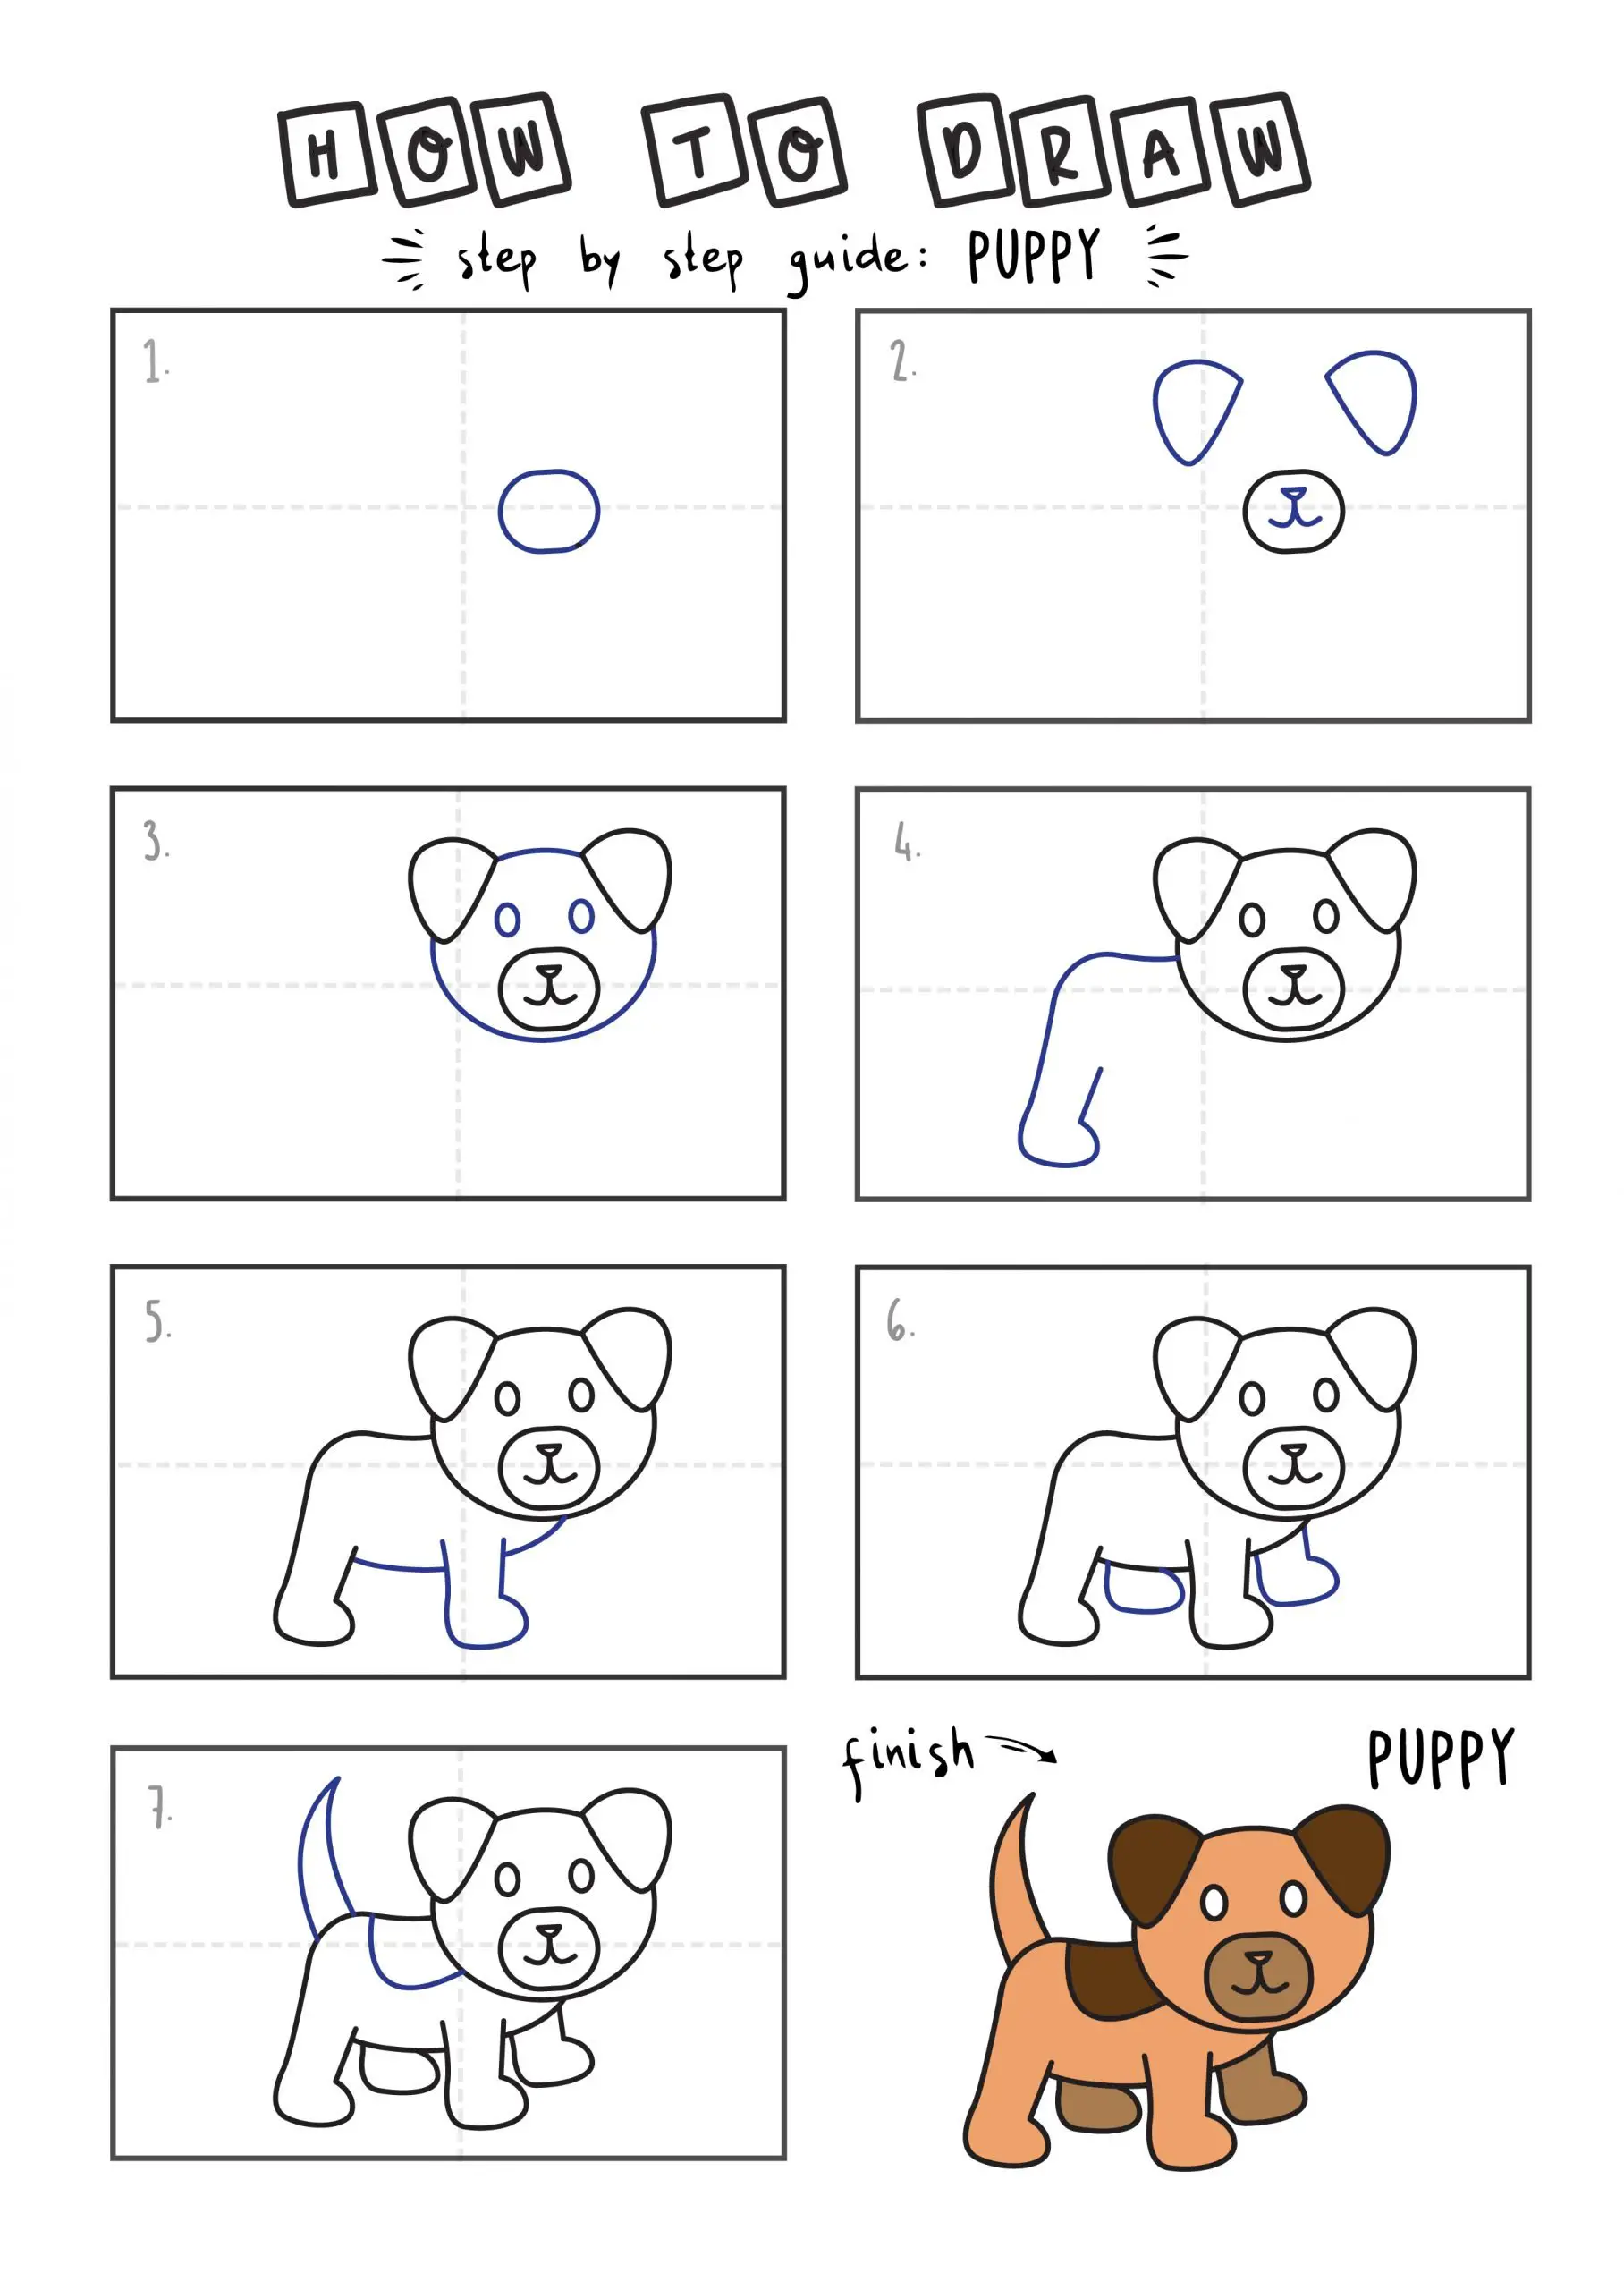 How To Draw Tutorials For Kids PUPPY YOUNG KIDS EASY DRAWINGS ART GUIDE STEP BY STEP